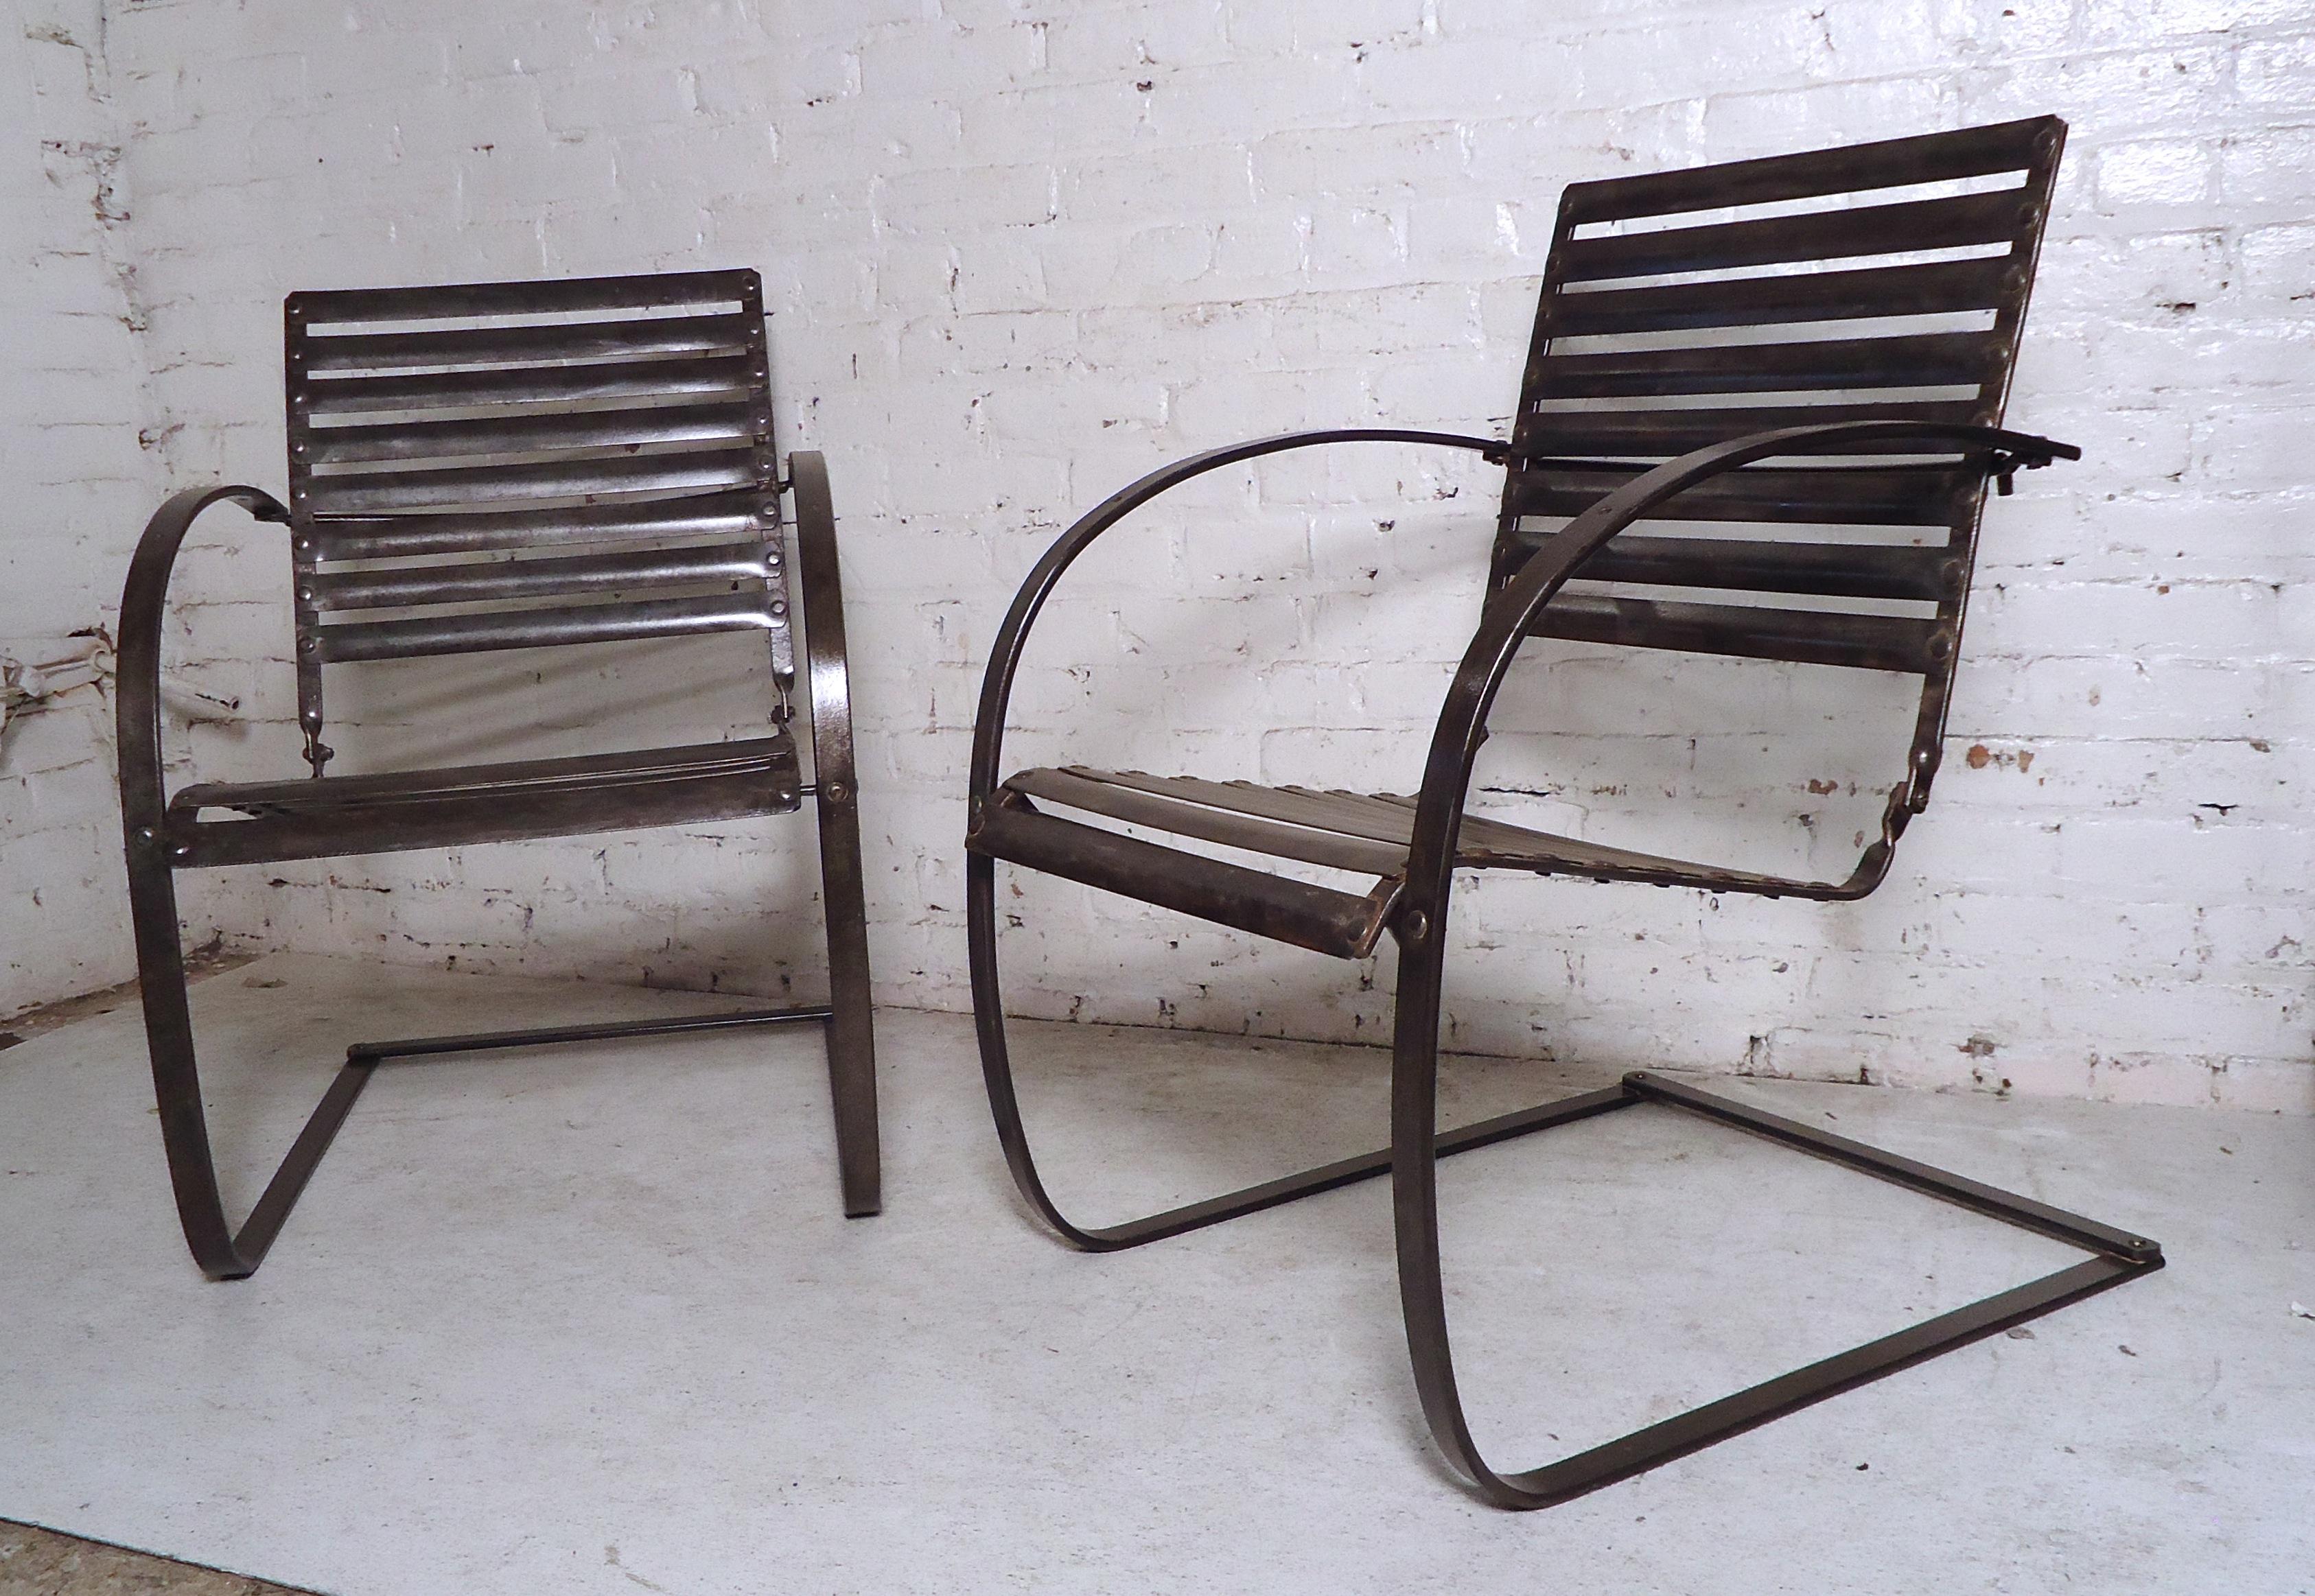 This pair of Industrial spring chairs feature a detachable seat, slat back and metal frame.
(Please confirm item location - NY or NJ - with dealer).